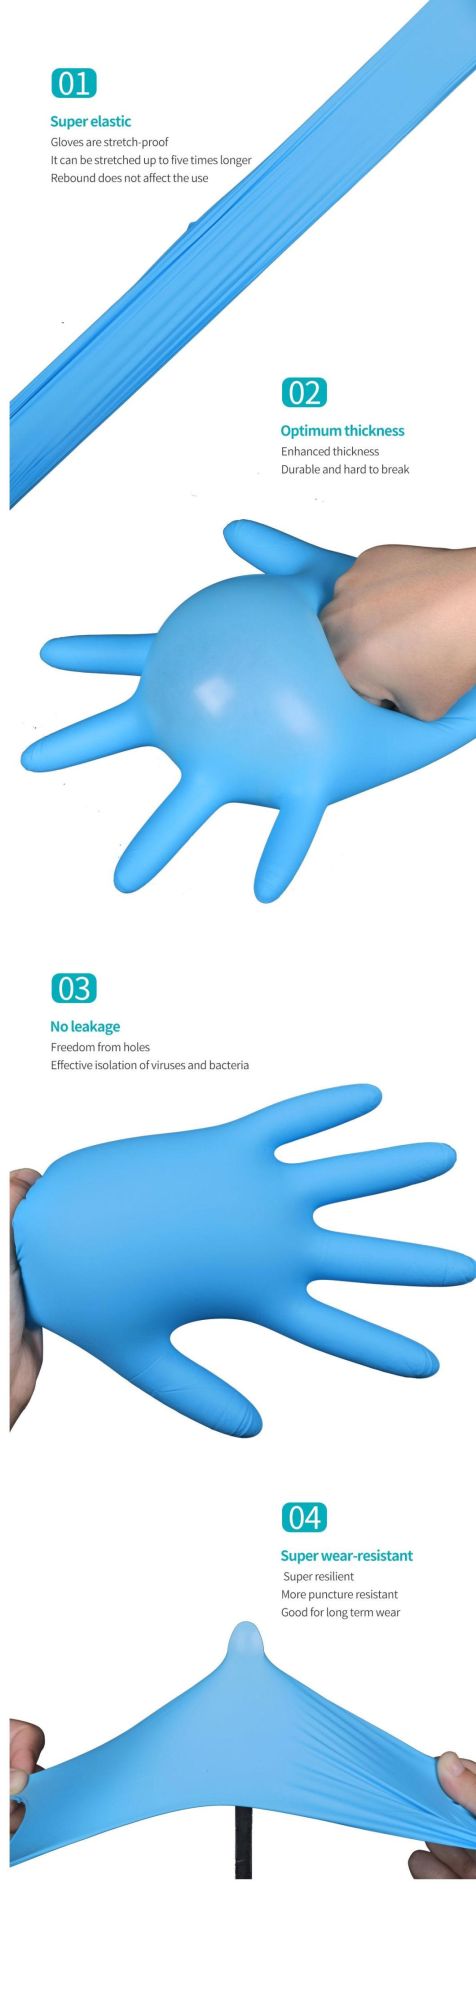 Household Electrical Appliances Disposable Safety Medical Nitrile Glove for Personal Protect